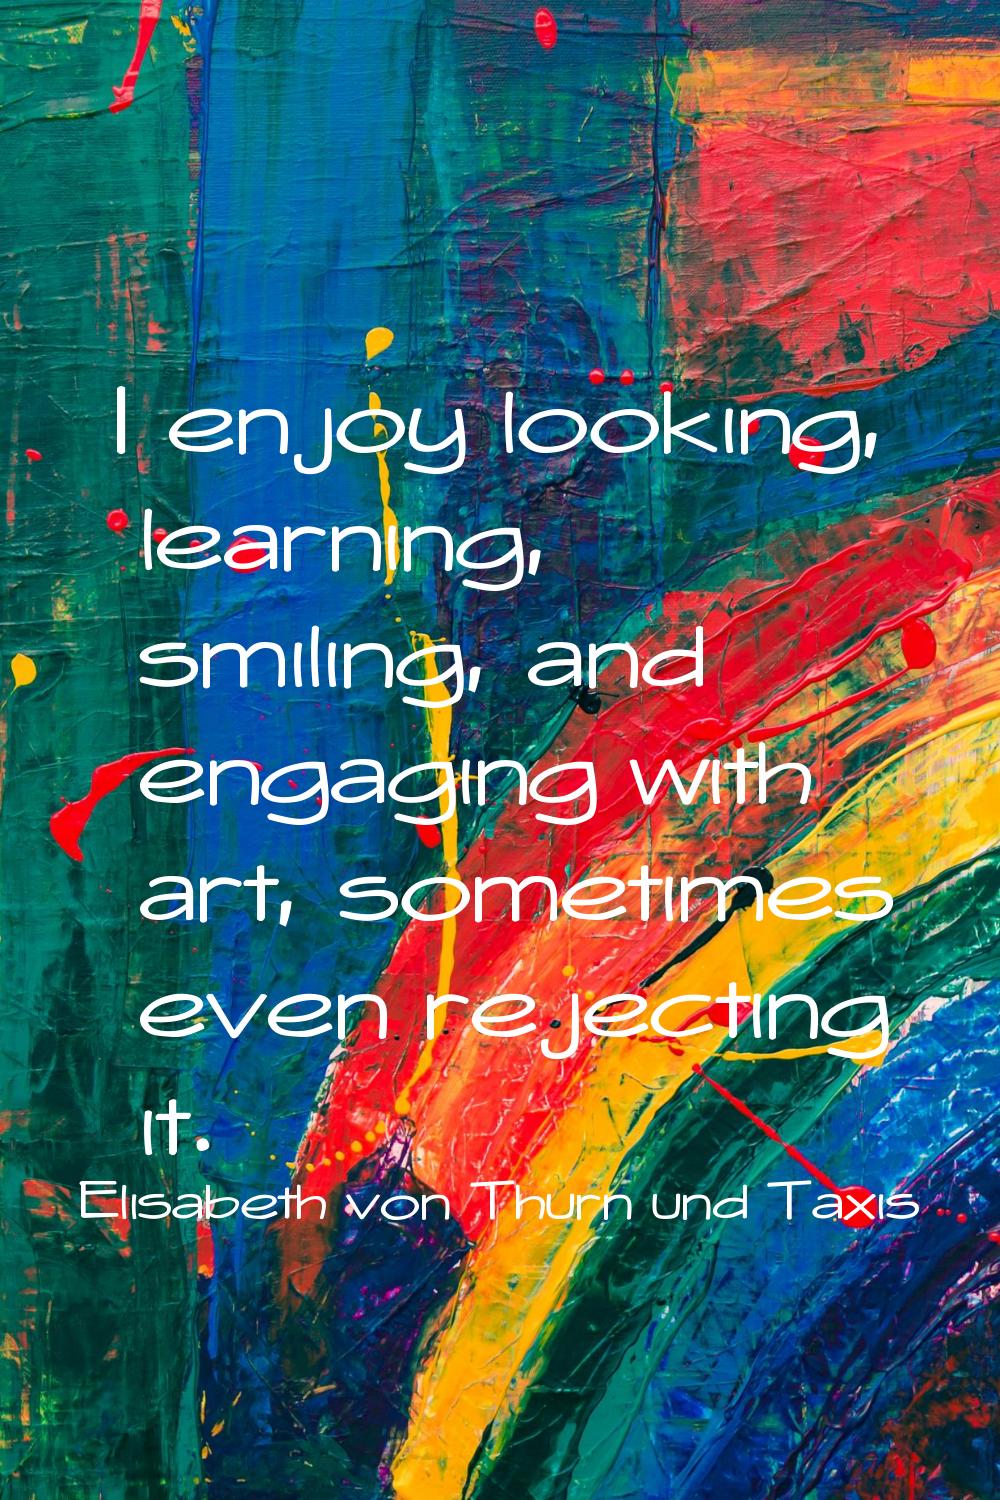 I enjoy looking, learning, smiling, and engaging with art, sometimes even rejecting it.